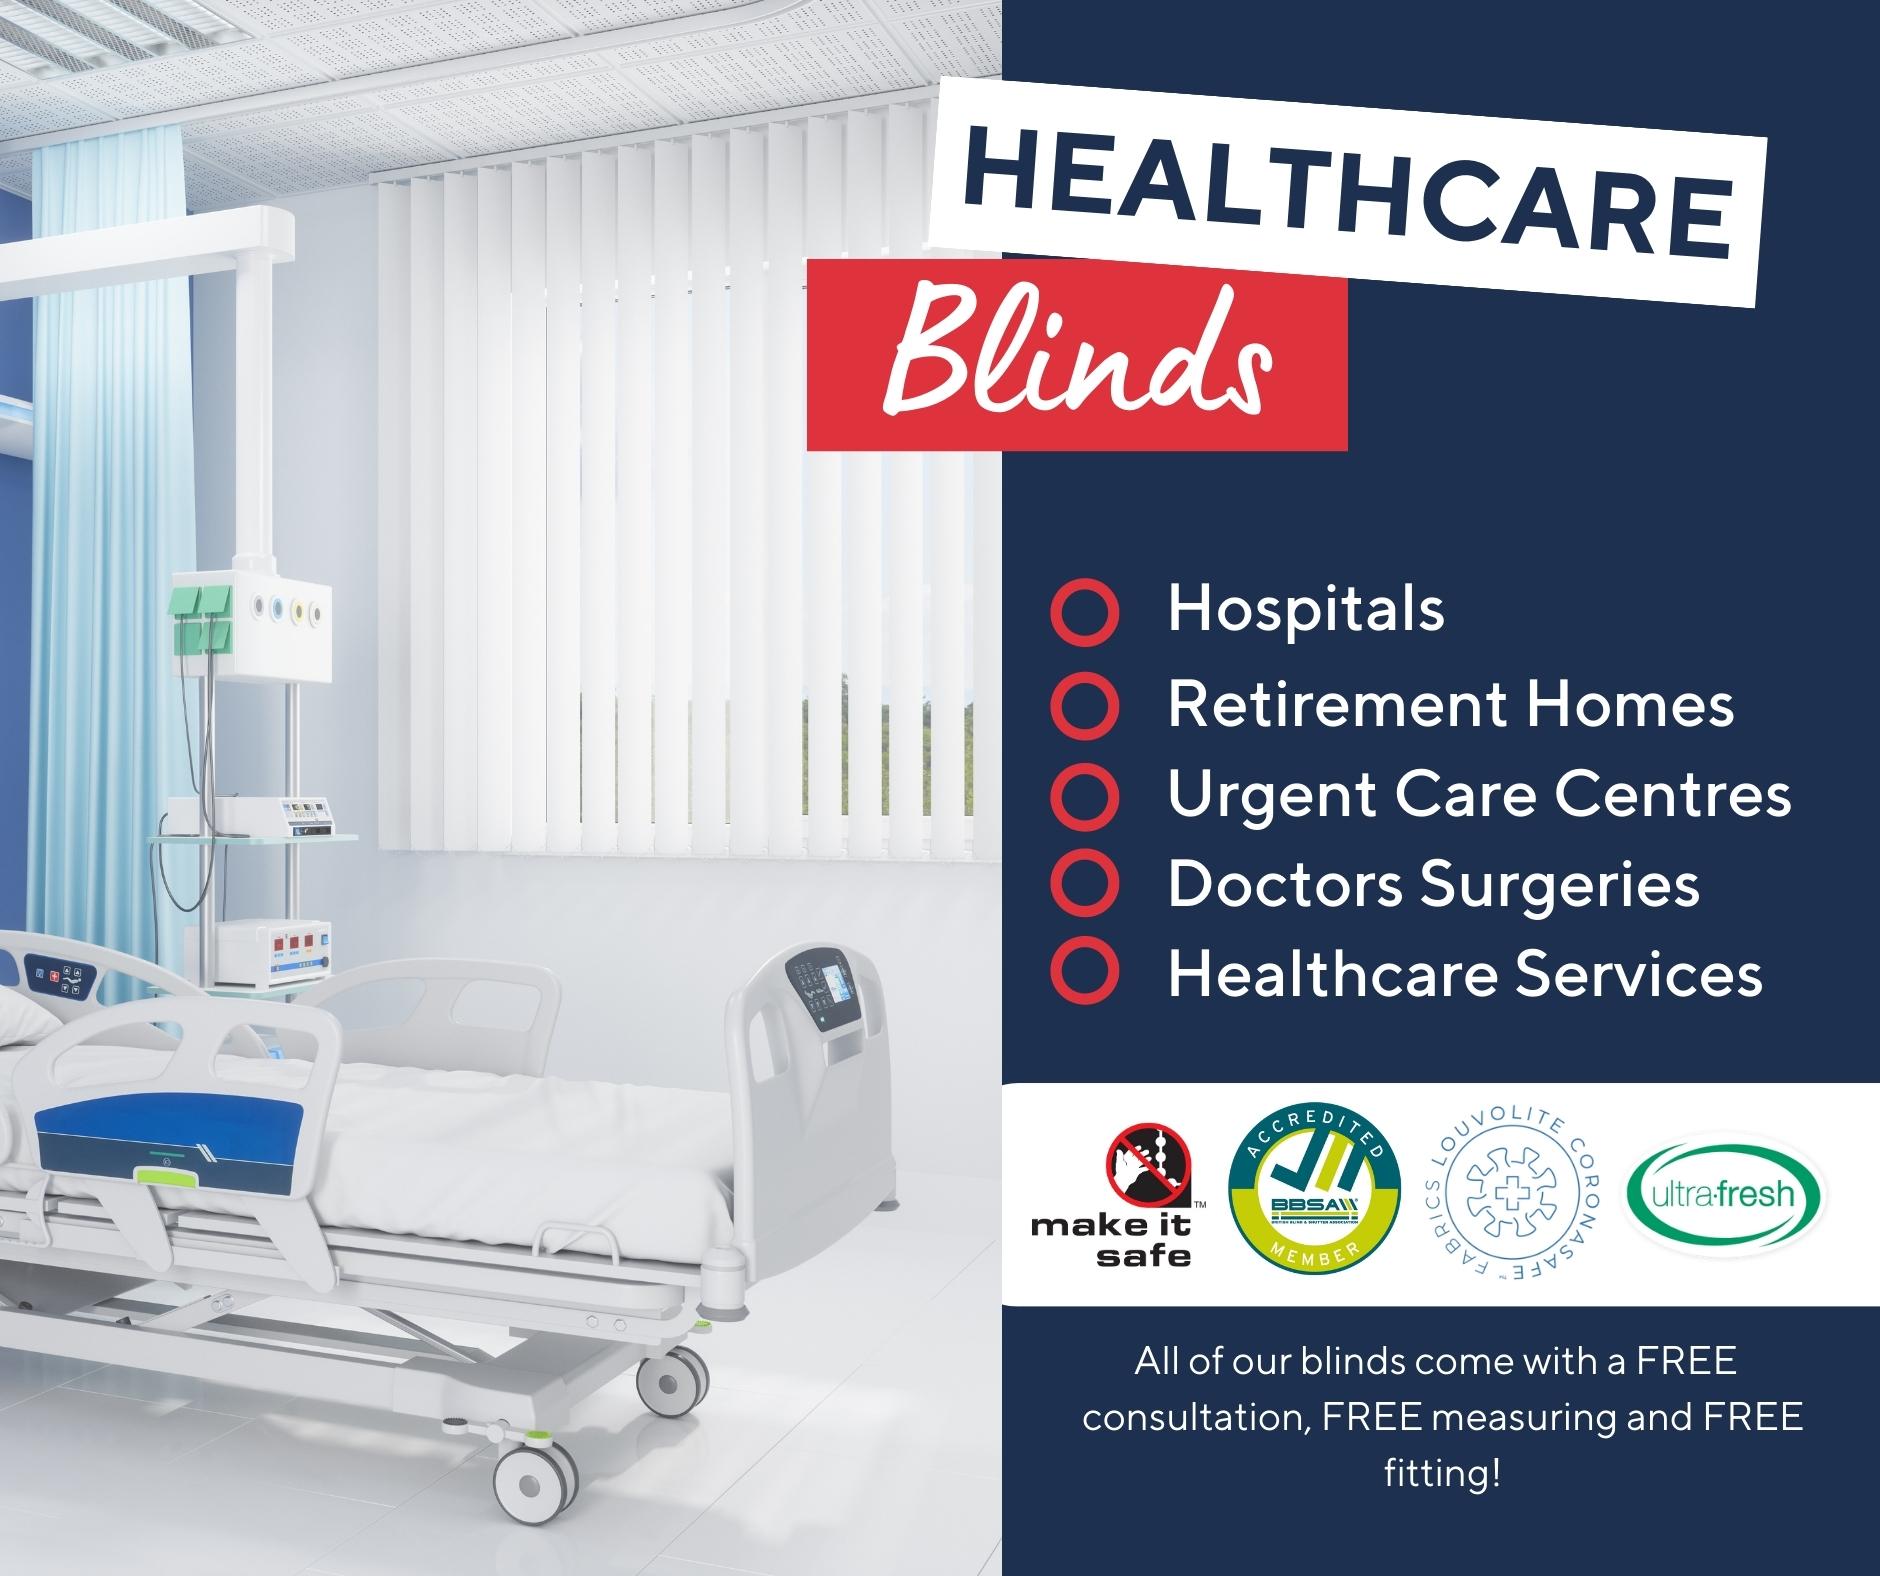 Healthcare Blinds